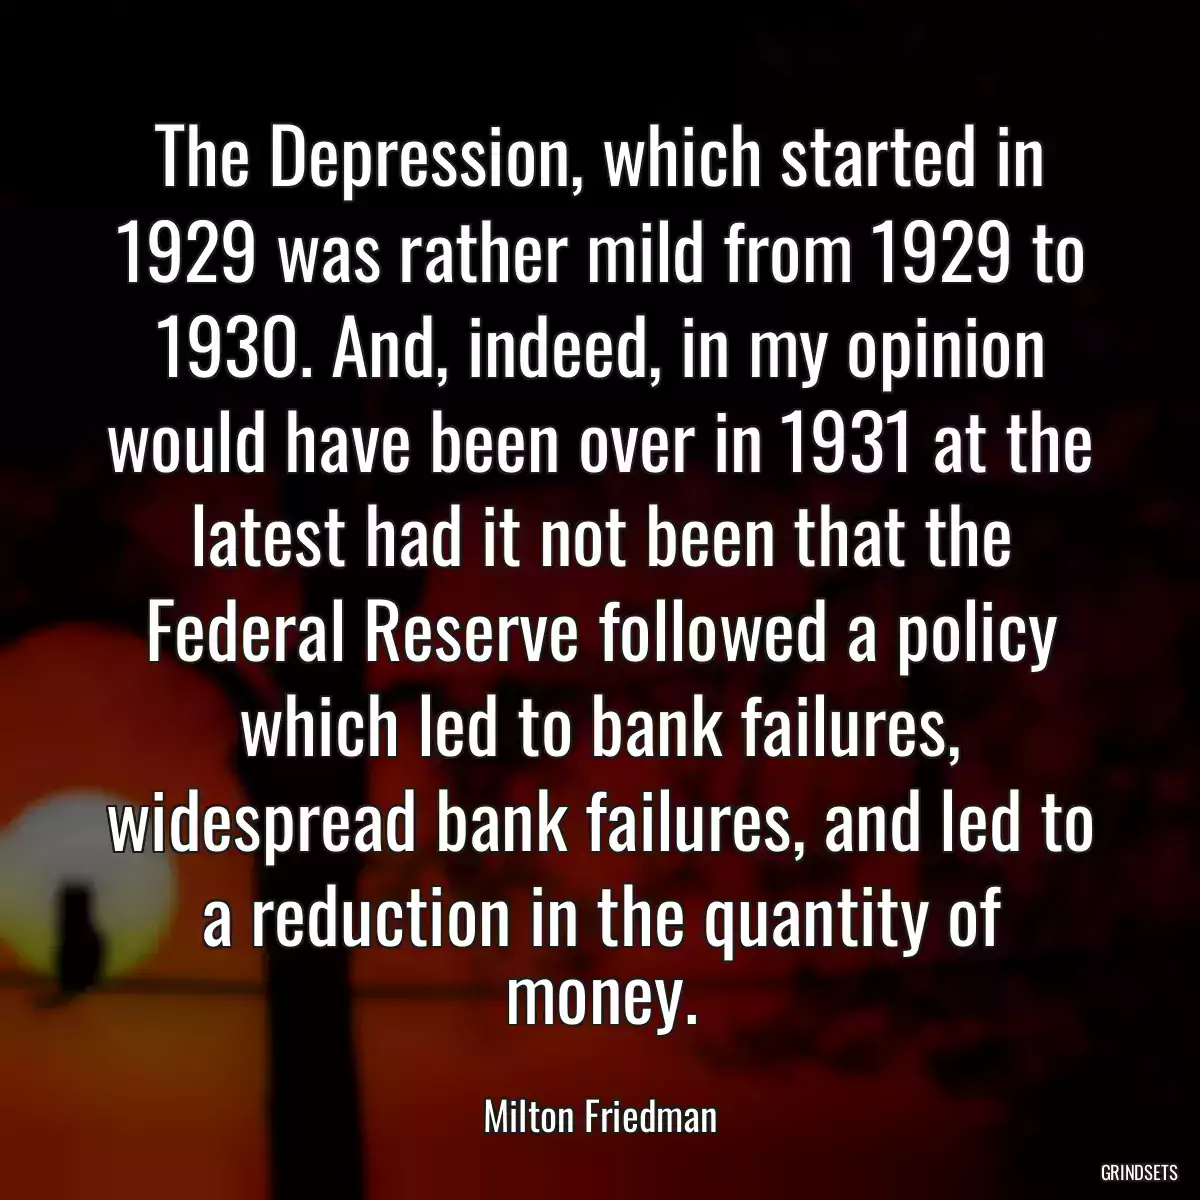 The Depression, which started in 1929 was rather mild from 1929 to 1930. And, indeed, in my opinion would have been over in 1931 at the latest had it not been that the Federal Reserve followed a policy which led to bank failures, widespread bank failures, and led to a reduction in the quantity of money.